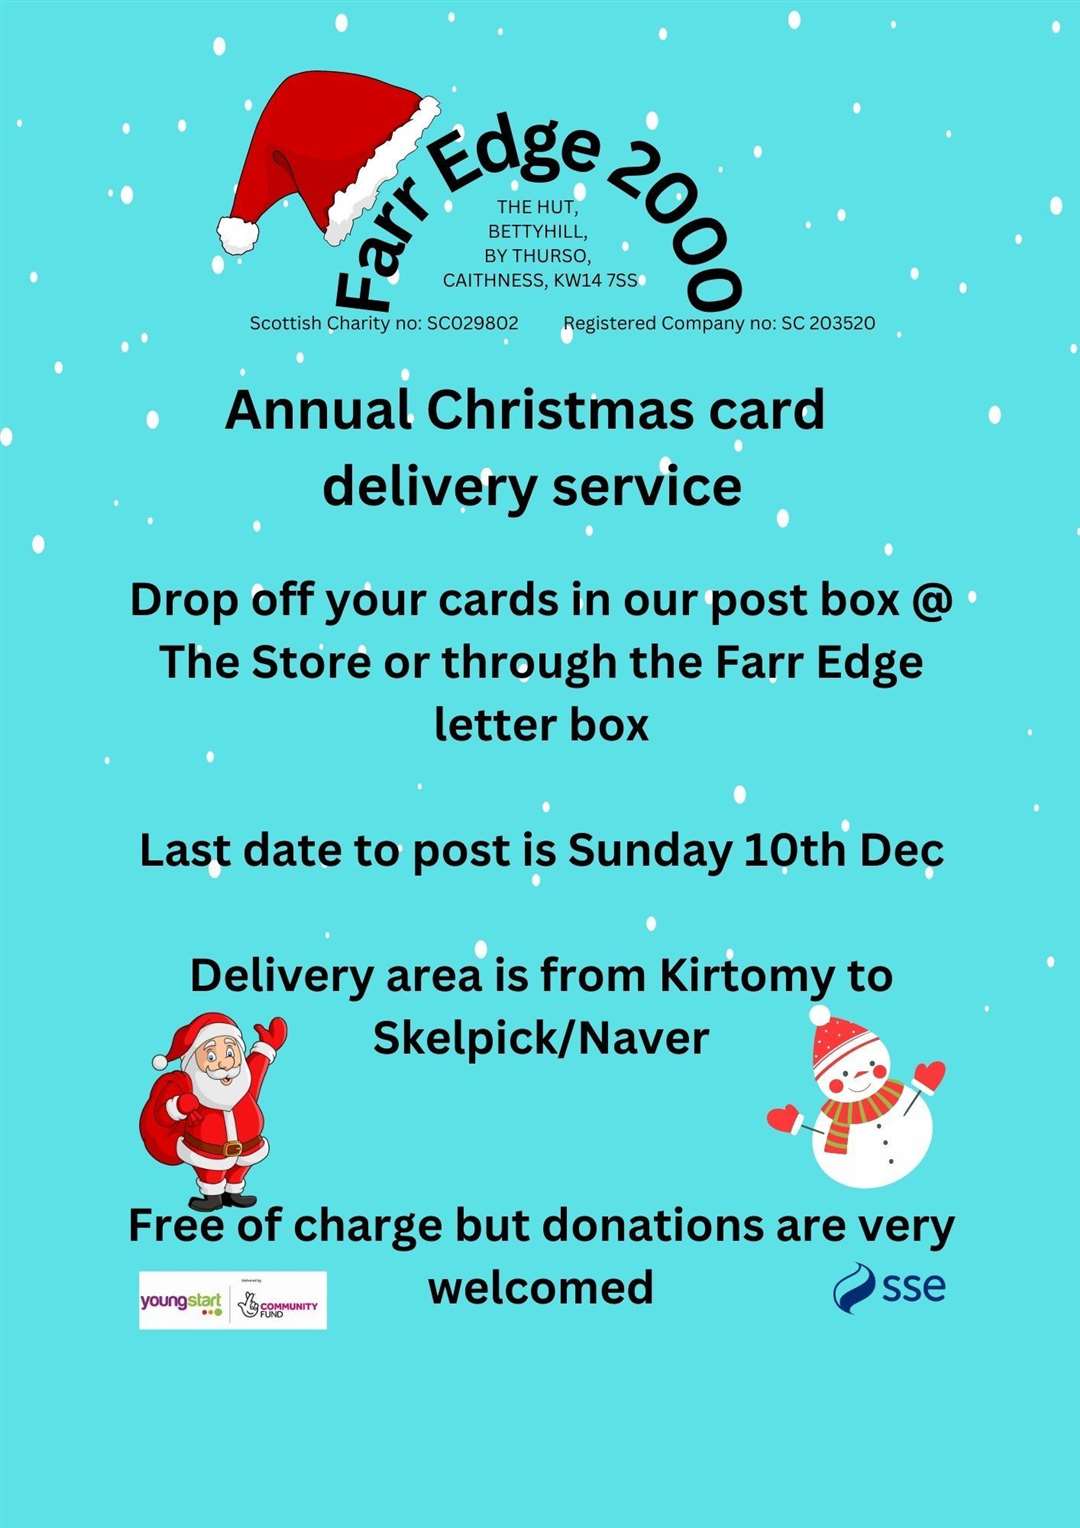 The Farr Edge Christmas card delivery service delivers from Kirtomy to Skelpick/Naver.